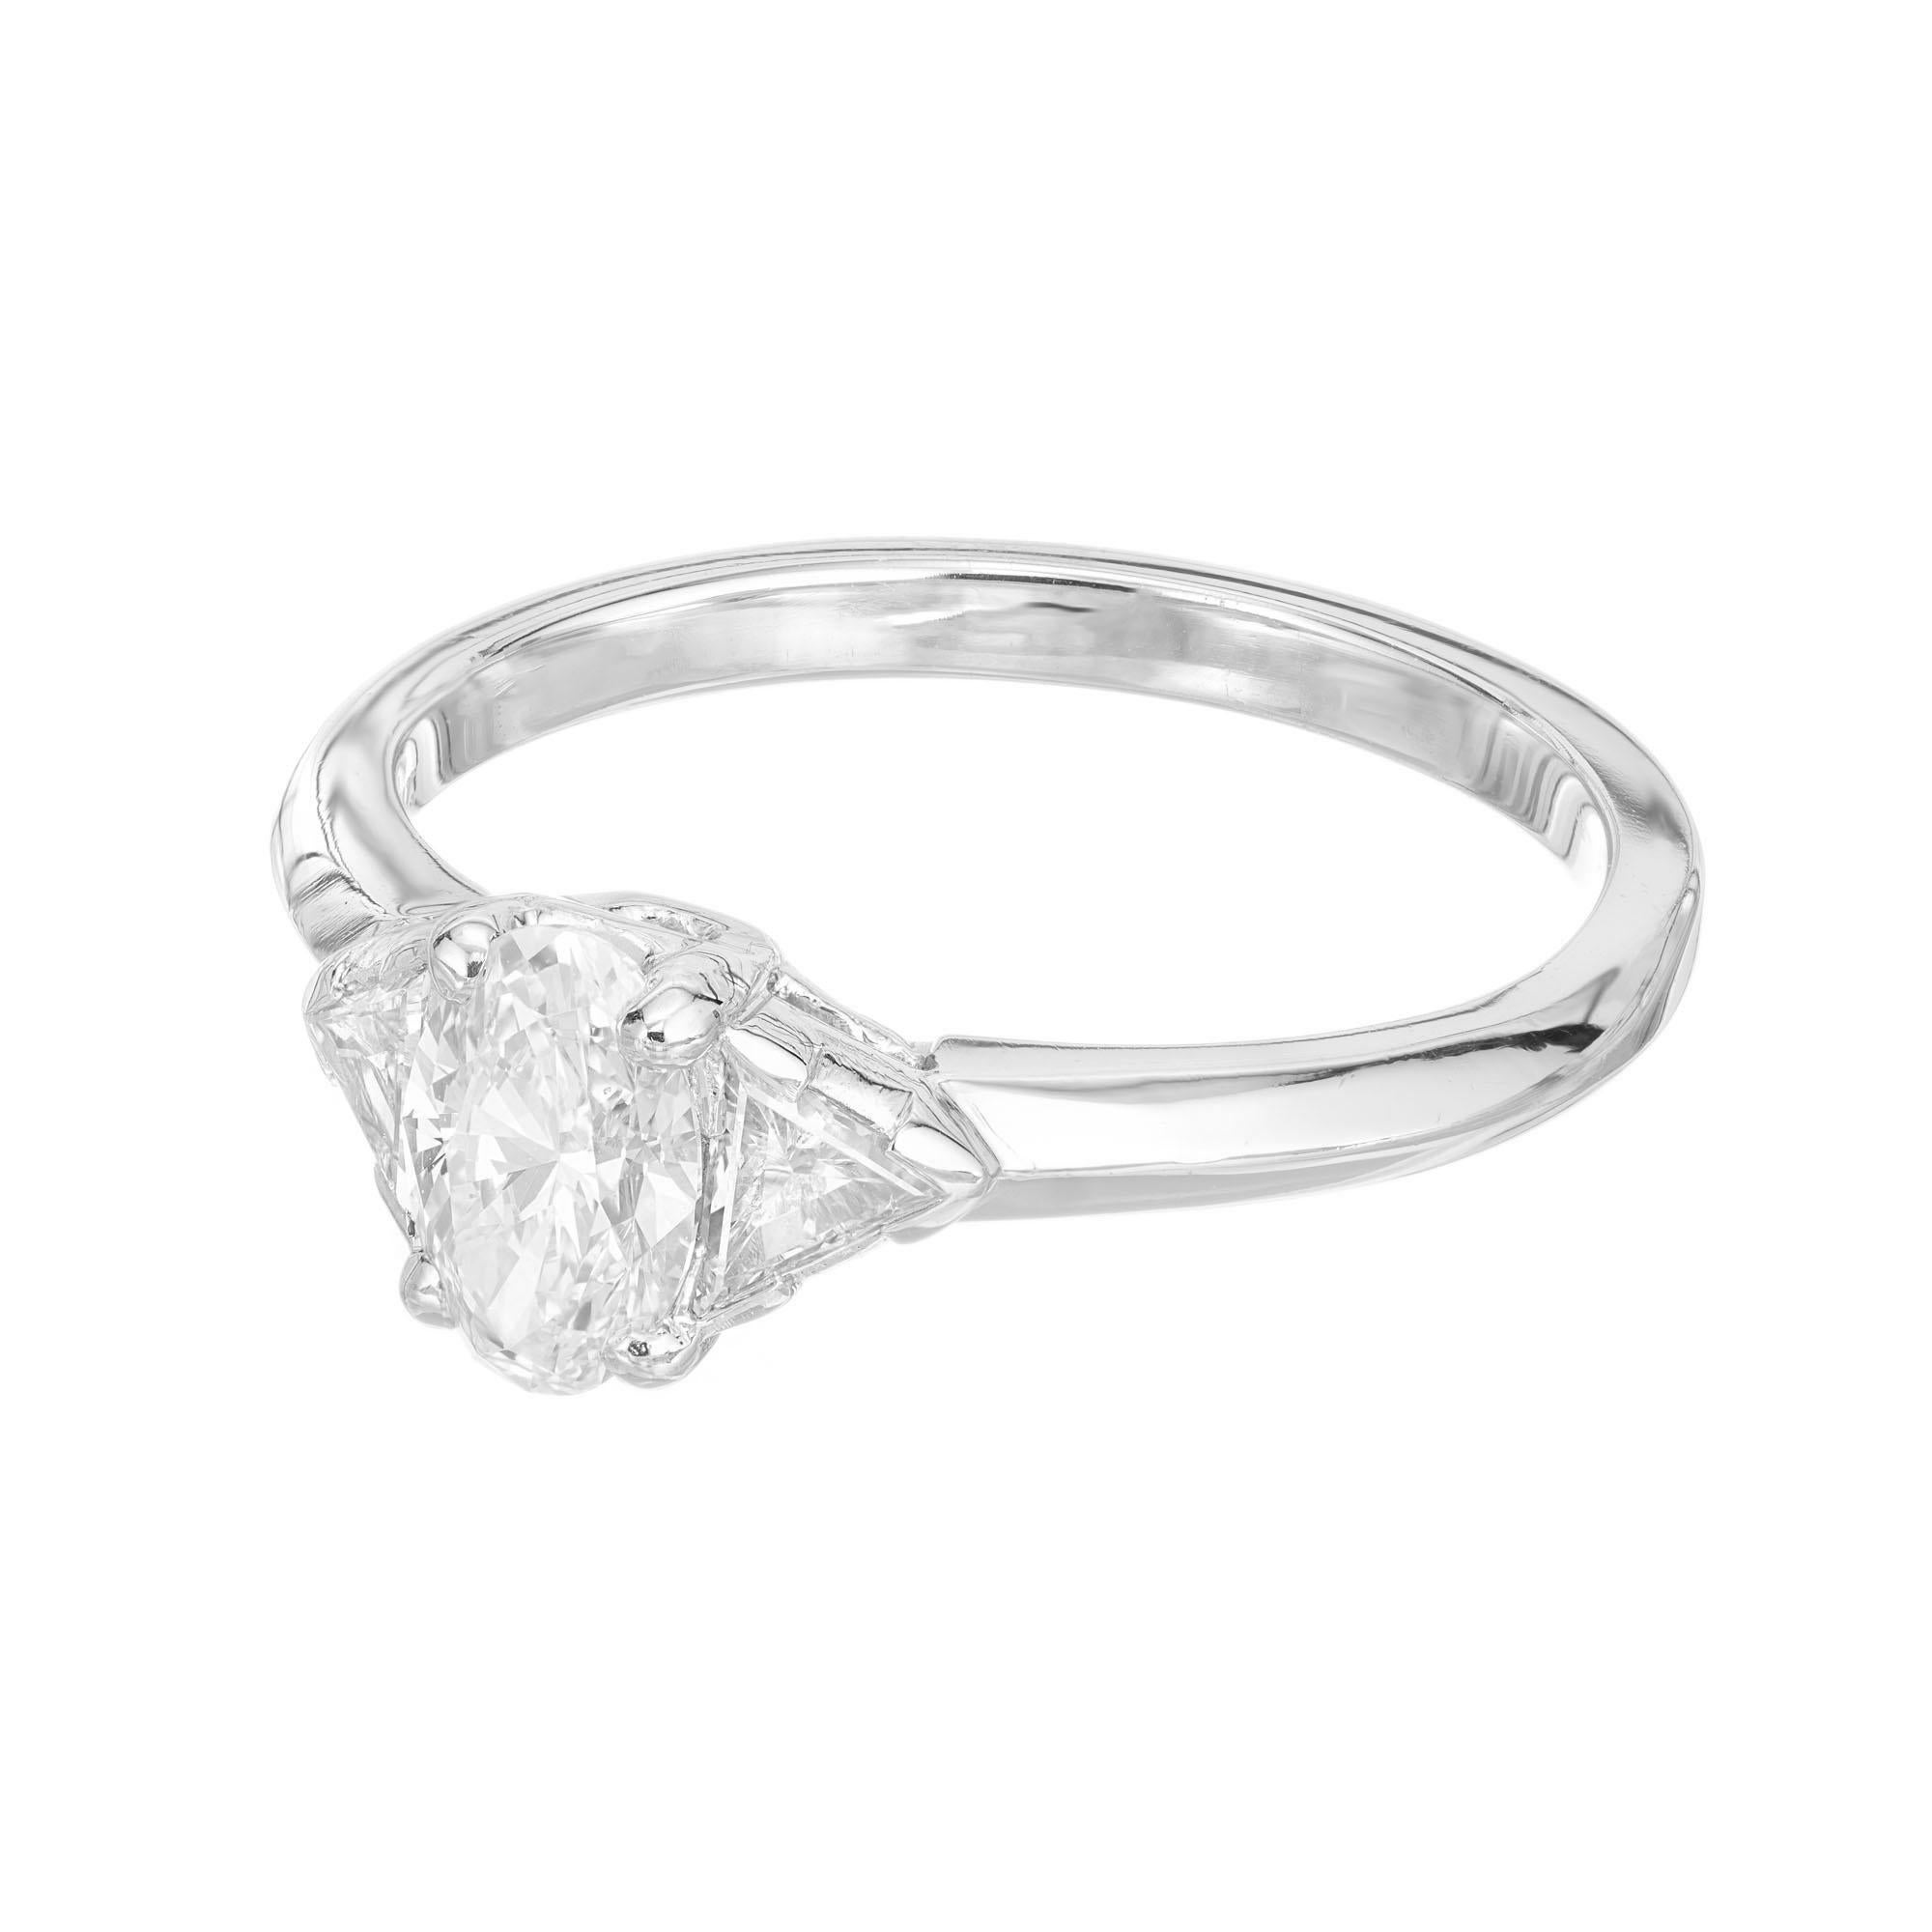 Tiffany & Co Platinum oval engagement ring. GIA certified oval center stone in a platinum three-stone setting with two trilliant cut side diamonds. Diamond removed and reset for GIA certification. 

1 GIA certified oval diamond, 0.58 cts, D, VS1,